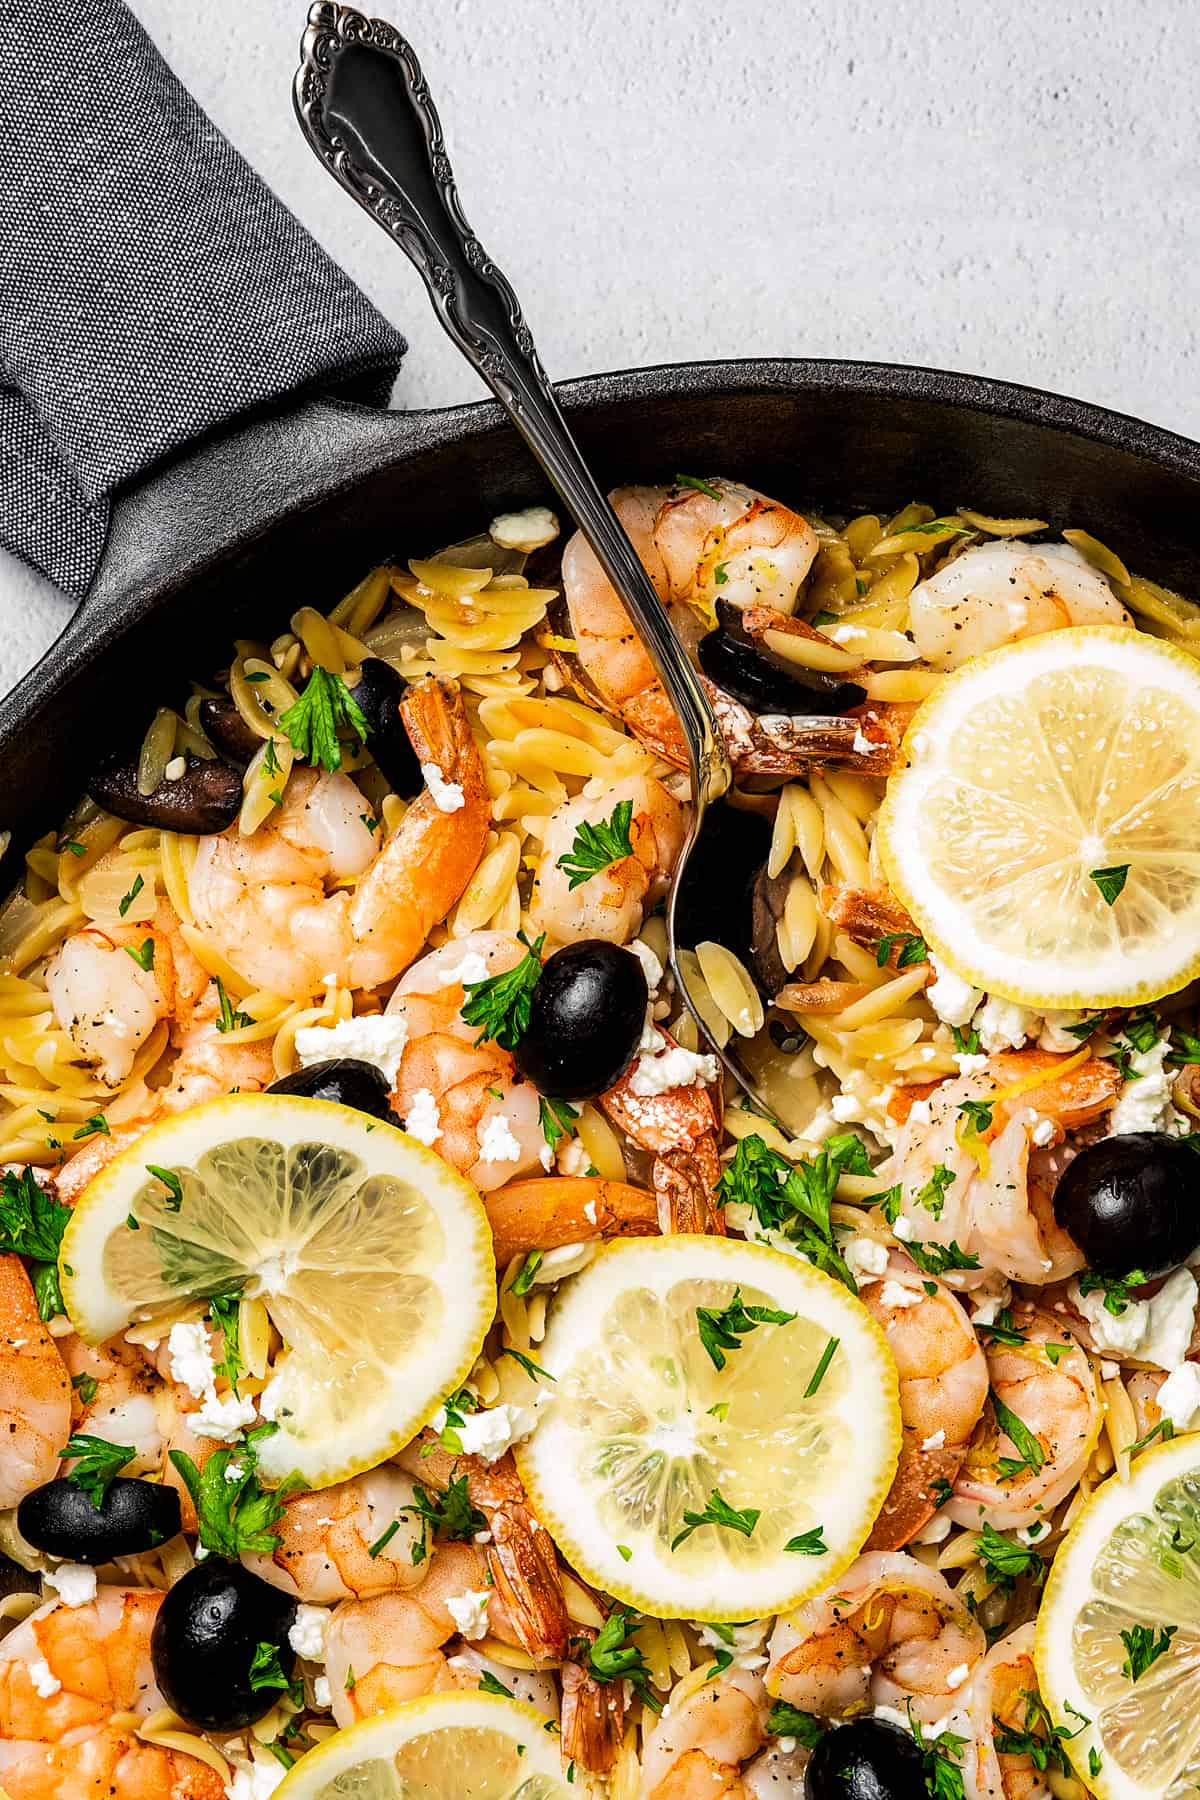 Orzo with seafood and black olives, garnished with lemon and herbs.